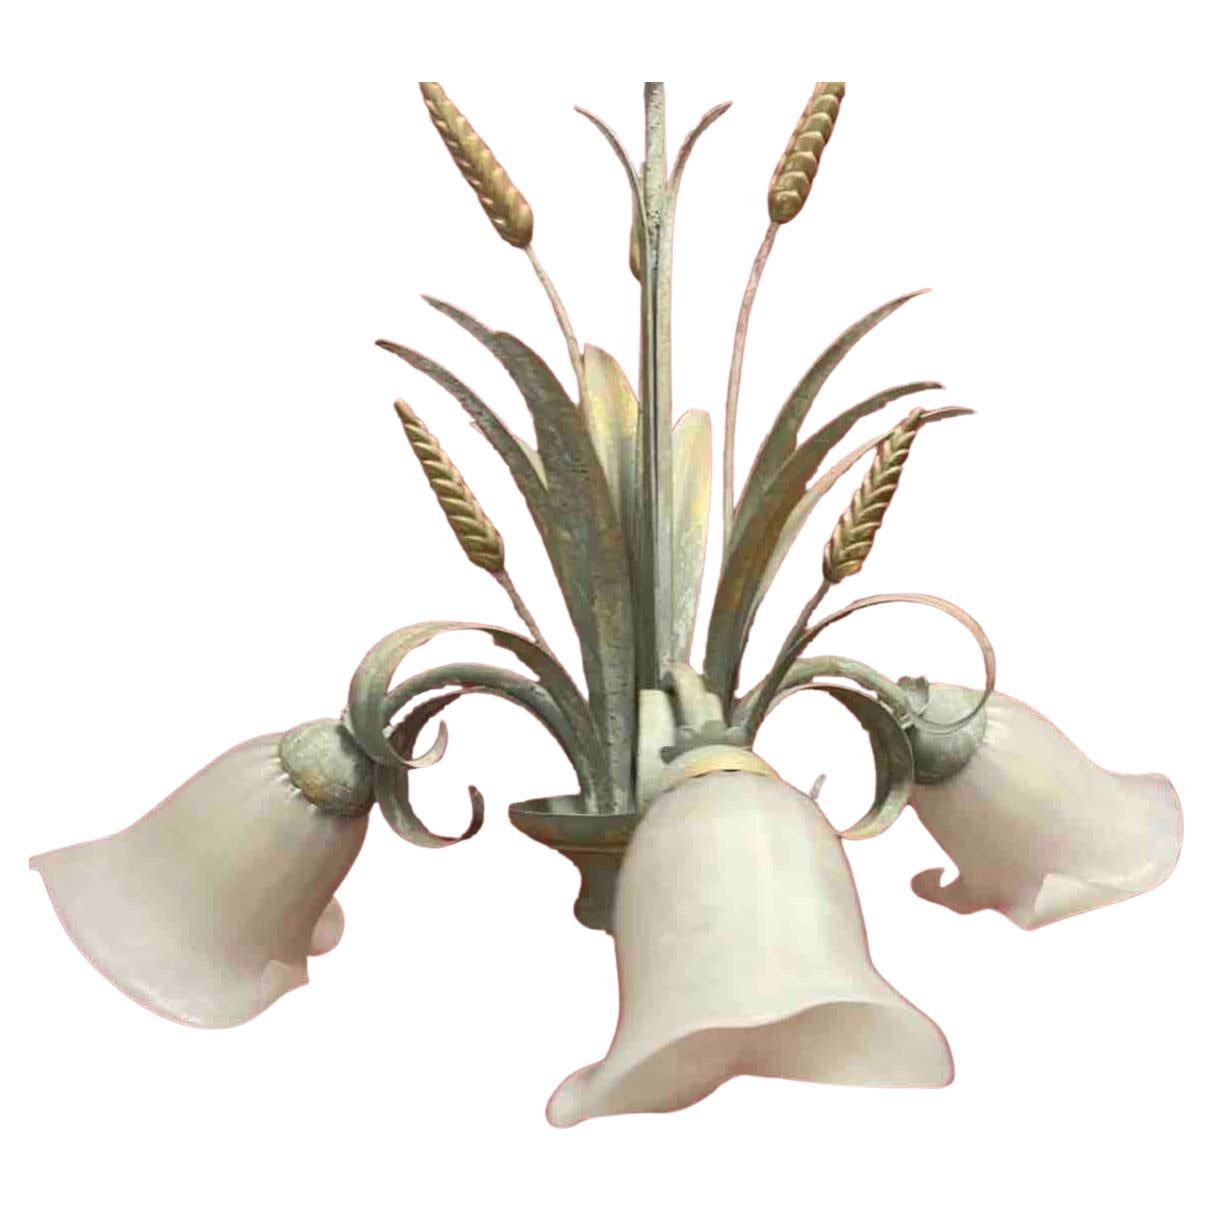 Italian Metal & Glass Shade Wheat Sheaf Chandelier Tole Toleware Coco Chanel Style For Sale